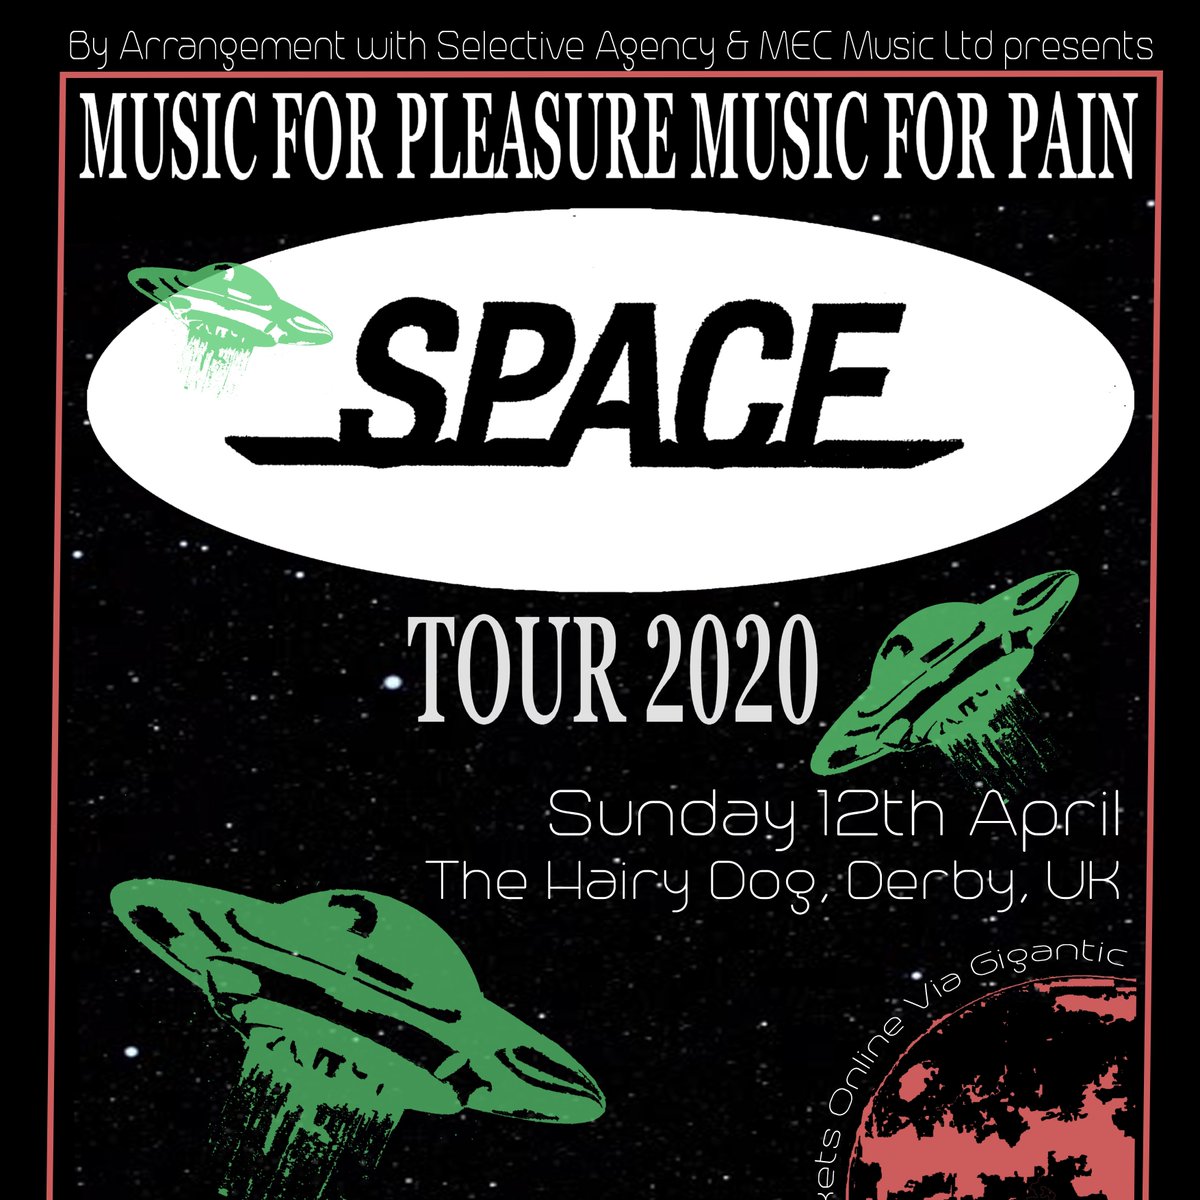 Just Announced!! By Arrangement with Selective Agency & MEC Music Ltd Present's SPACE - Music for Pleasure, Music for Pain Tour. Sunday 12th April, The Hairy Dog, Derby, UK. £17.50 Advance. Ticket Link: gigantic.com/space-music-fo… hairydogvenue.co.uk